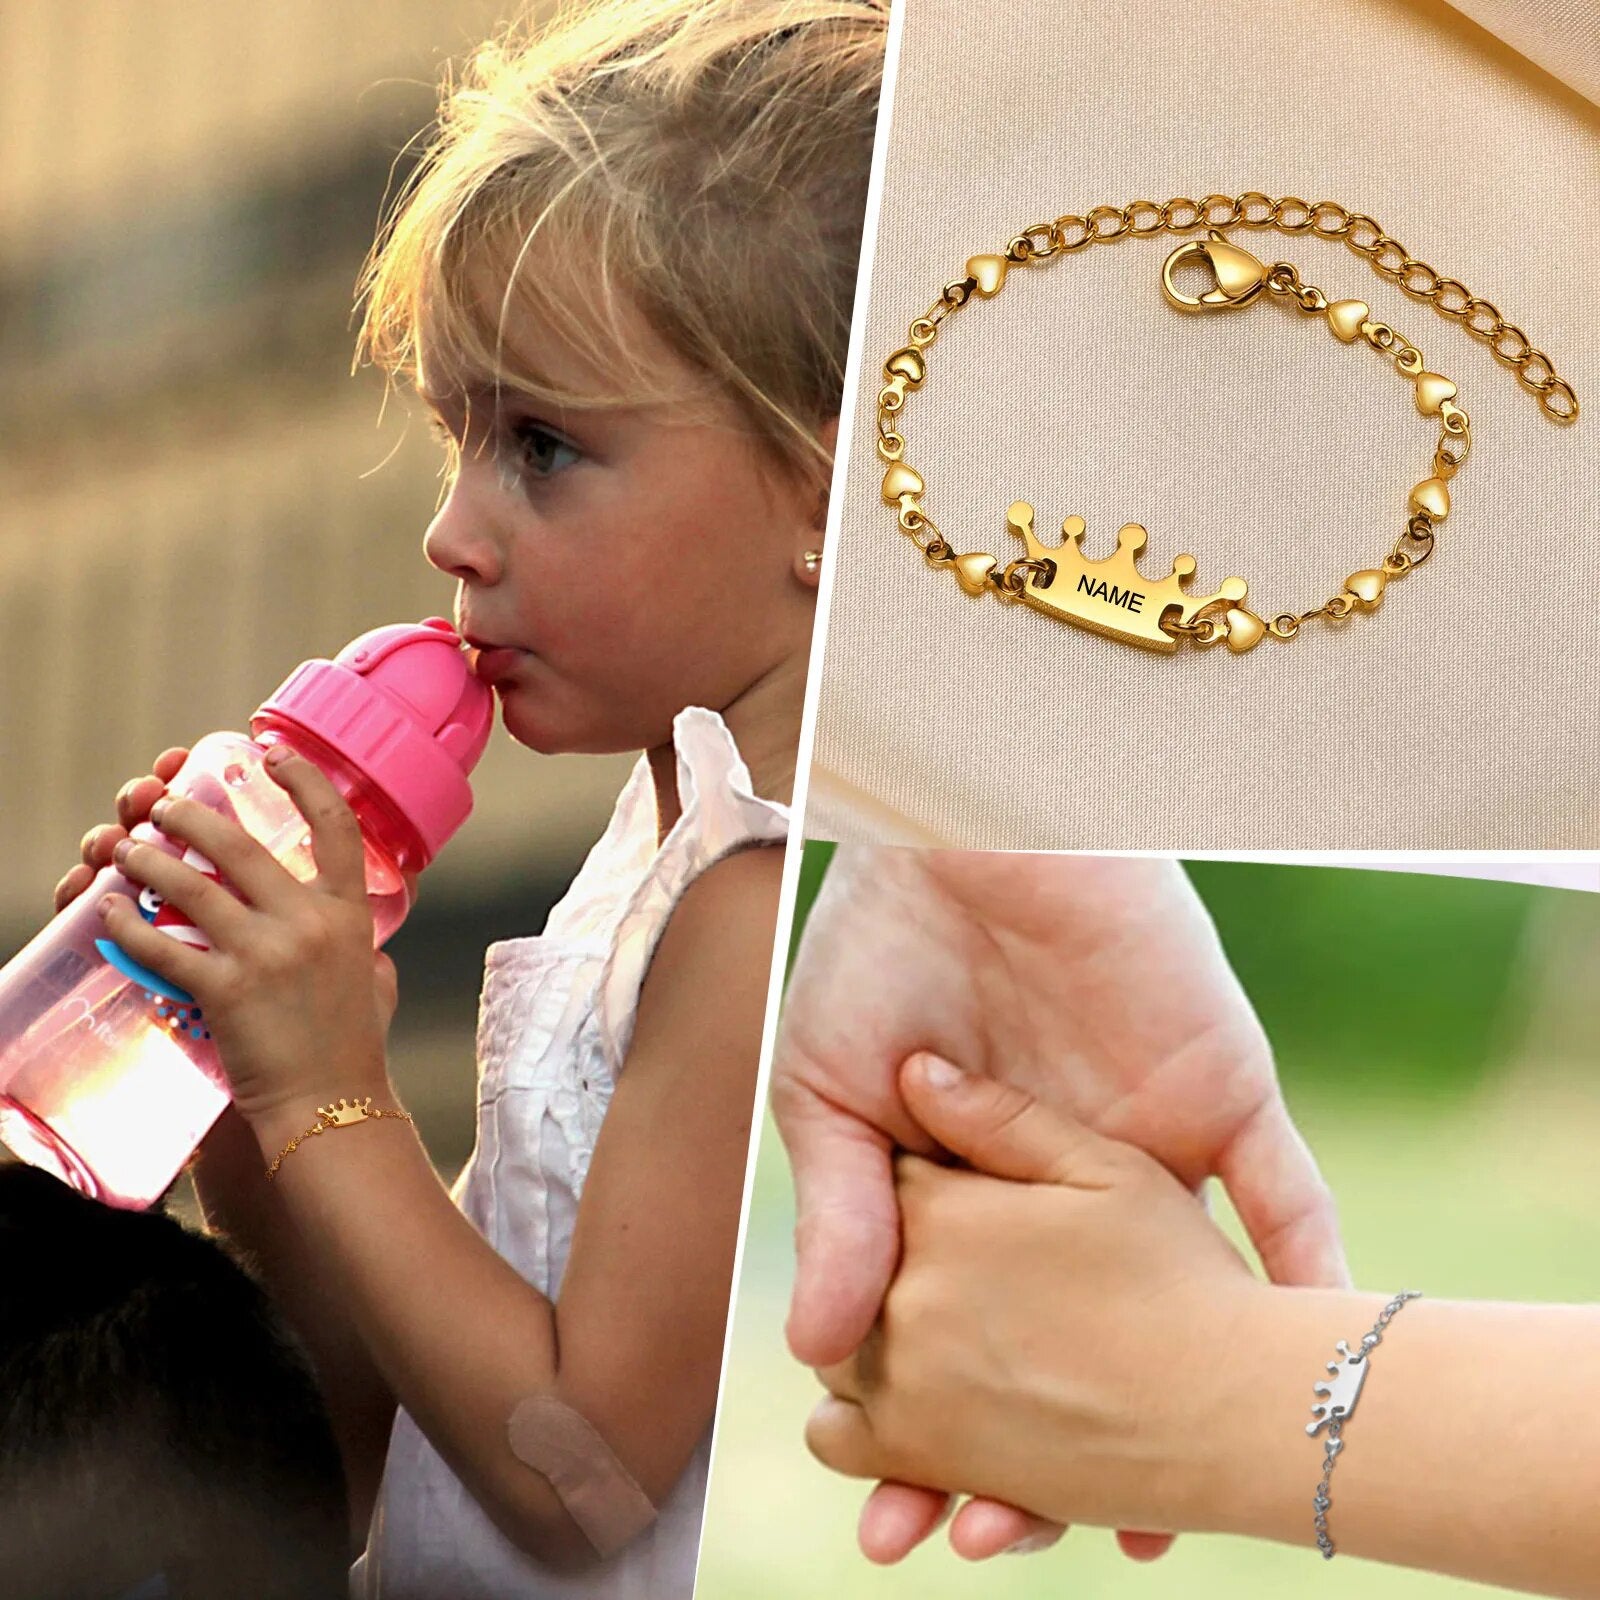 Royal Elegance for Little Royals: Personalized Name Crown Bracelet for Kids – The Perfect Birthday Gift!